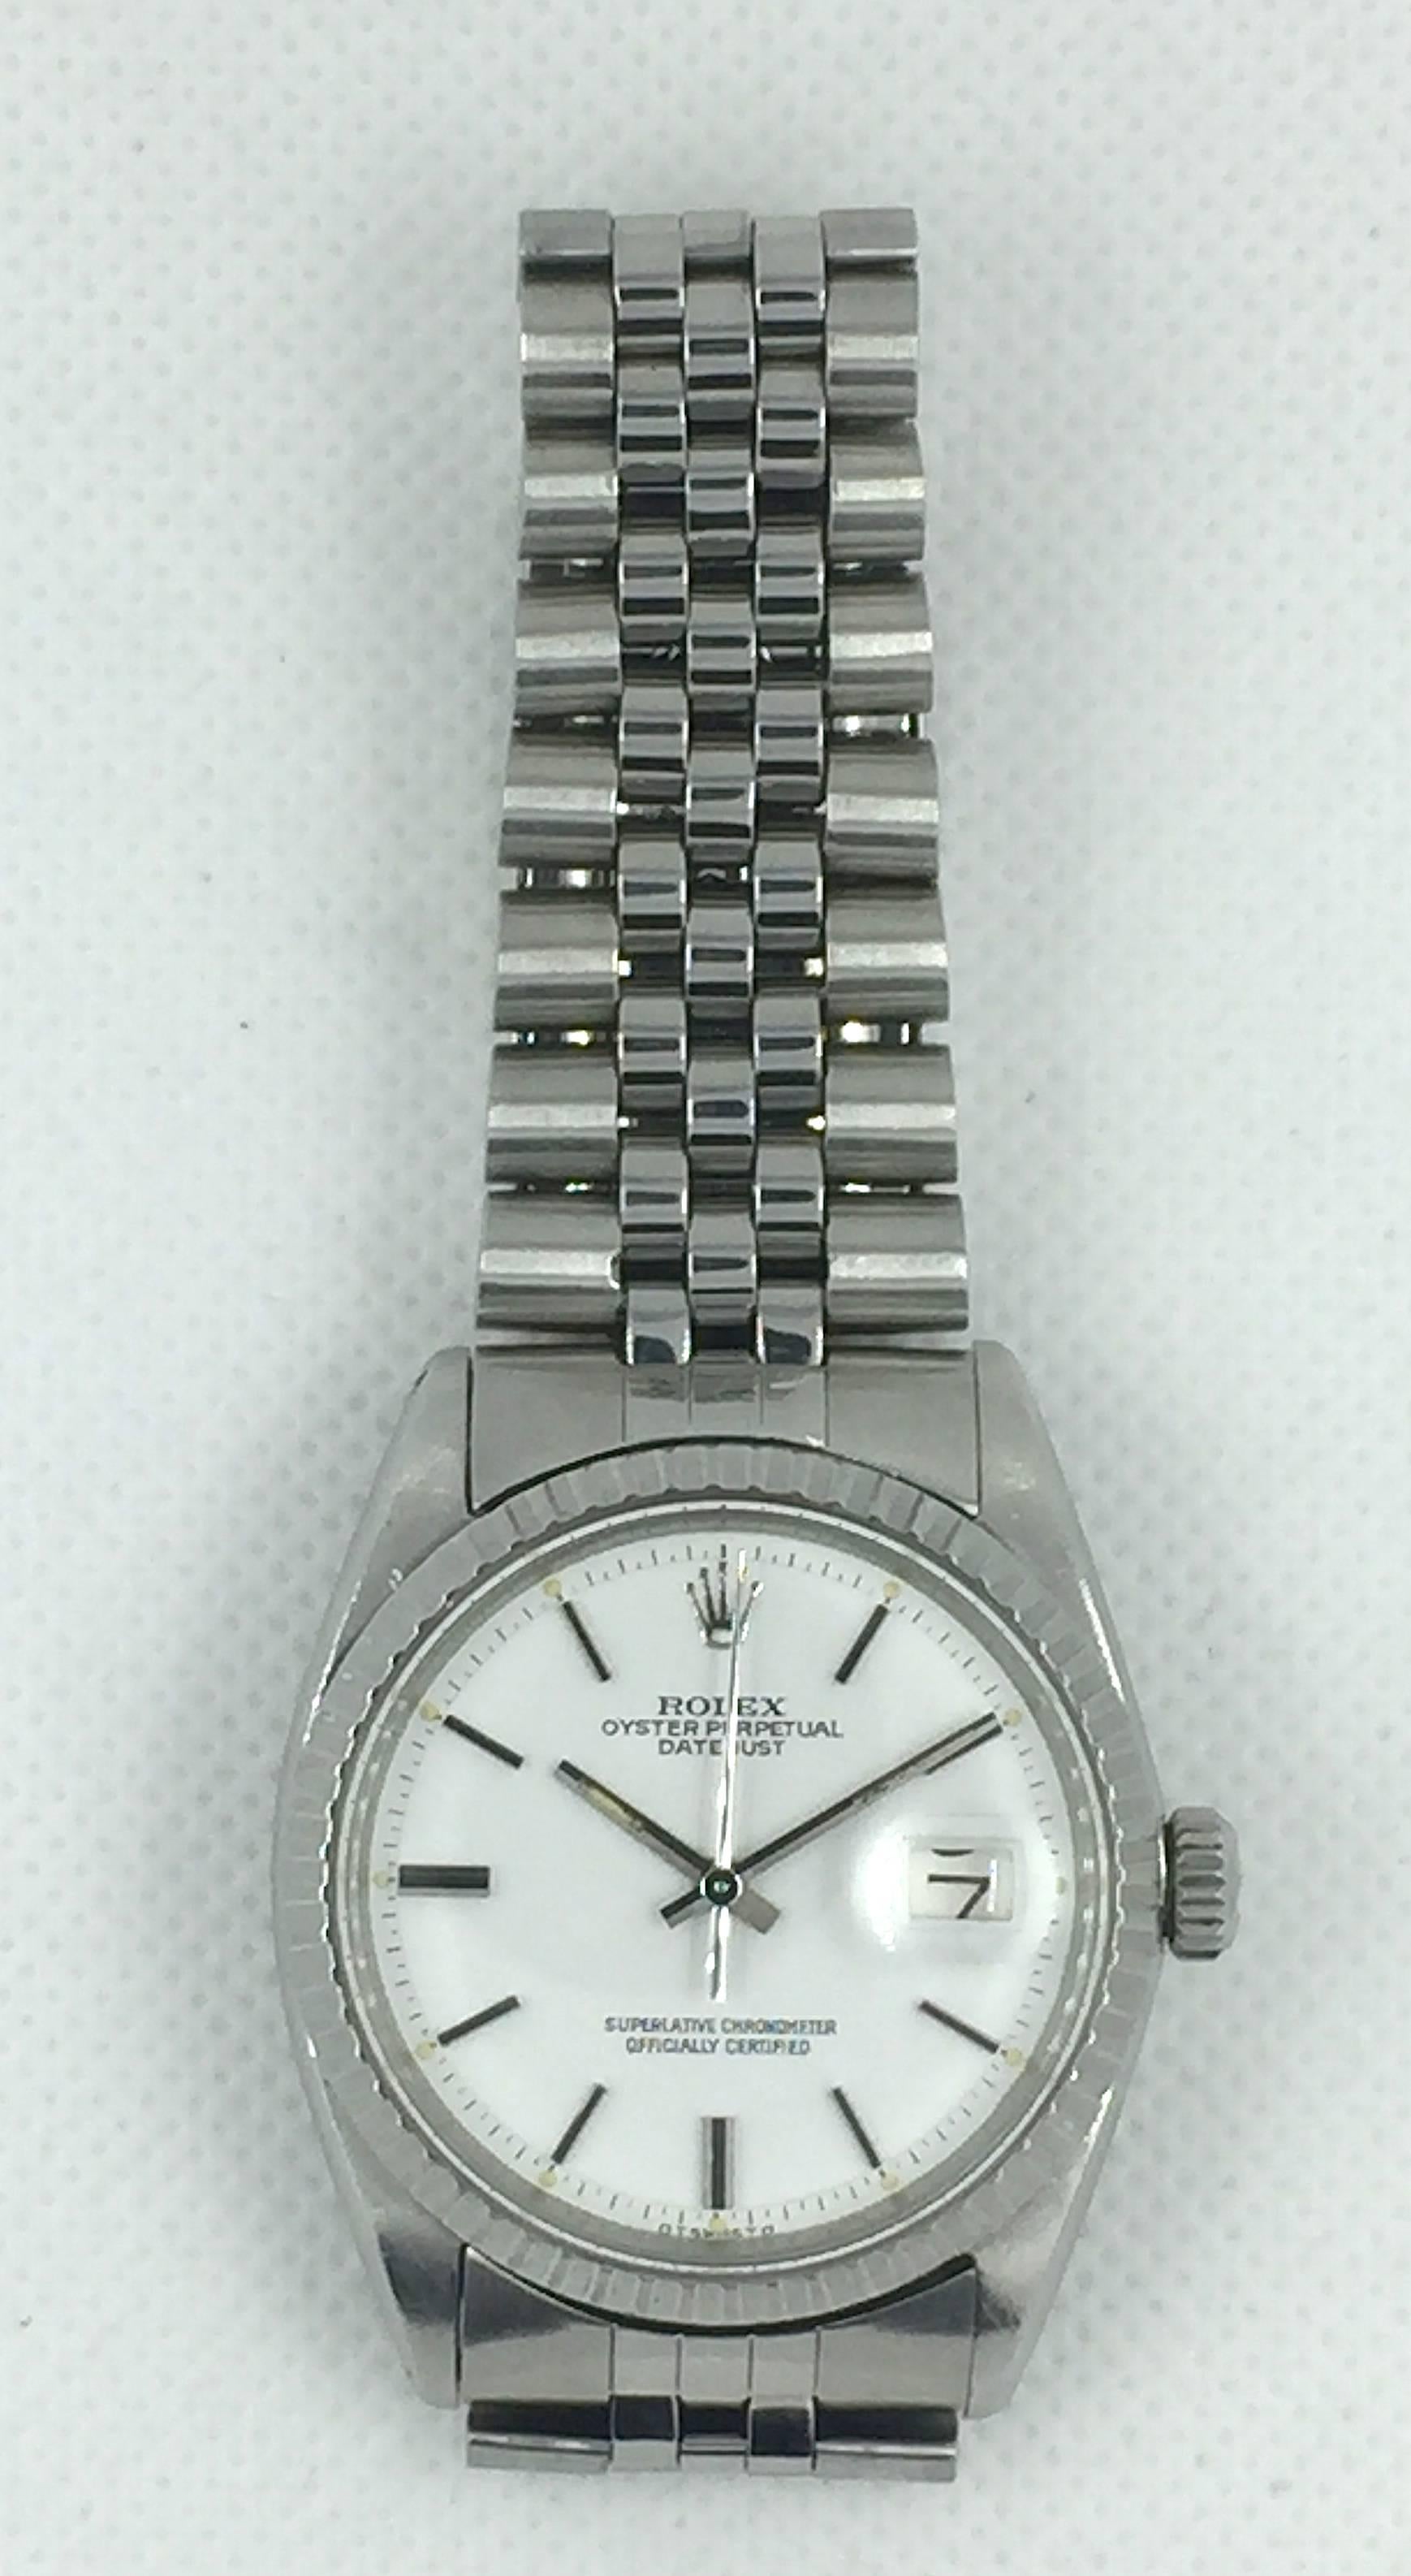 Rolex Stainless Steel Oyster Perpetual Datejust Wristwatch
Factory 'Snow-White' Sigma Dial with Applied Hour Markers
Stainless Steel Engine-Turned Bezel
36mm in size 
Rolex Calibre Base 1500 Automatic Movement
Acrylic Crystal
Late 1960's